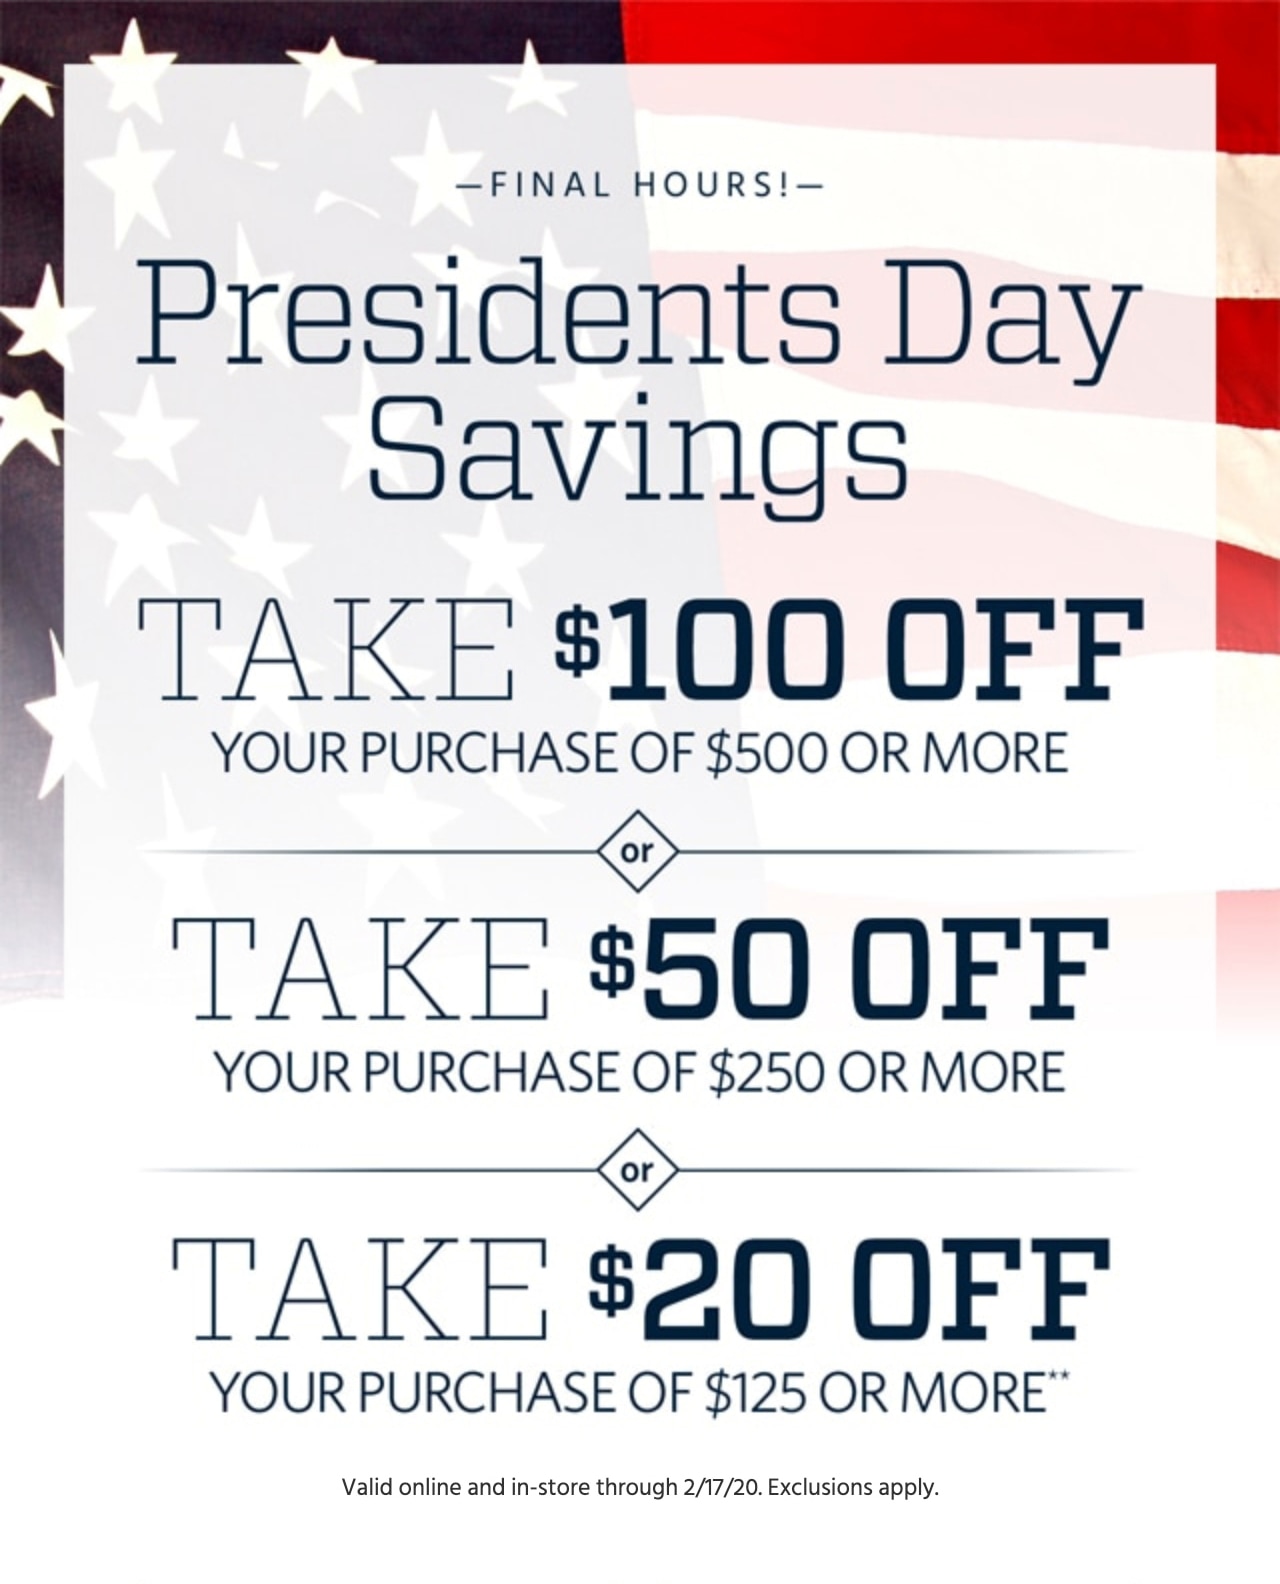 Last Day! Presidents Day Savings. Take $100 Off Your Purchase of $500 or More or Take $50 Off Your Purchase of $250 or More or Take $20 Off Your Purchase of $125 or More**. Valid online and in-store through February 17, 2020. Exclusions apply. If after February 18, 2020 at 2:59 AM EST, sorry! You missed this promotion, but you can still shop this week's best deals.